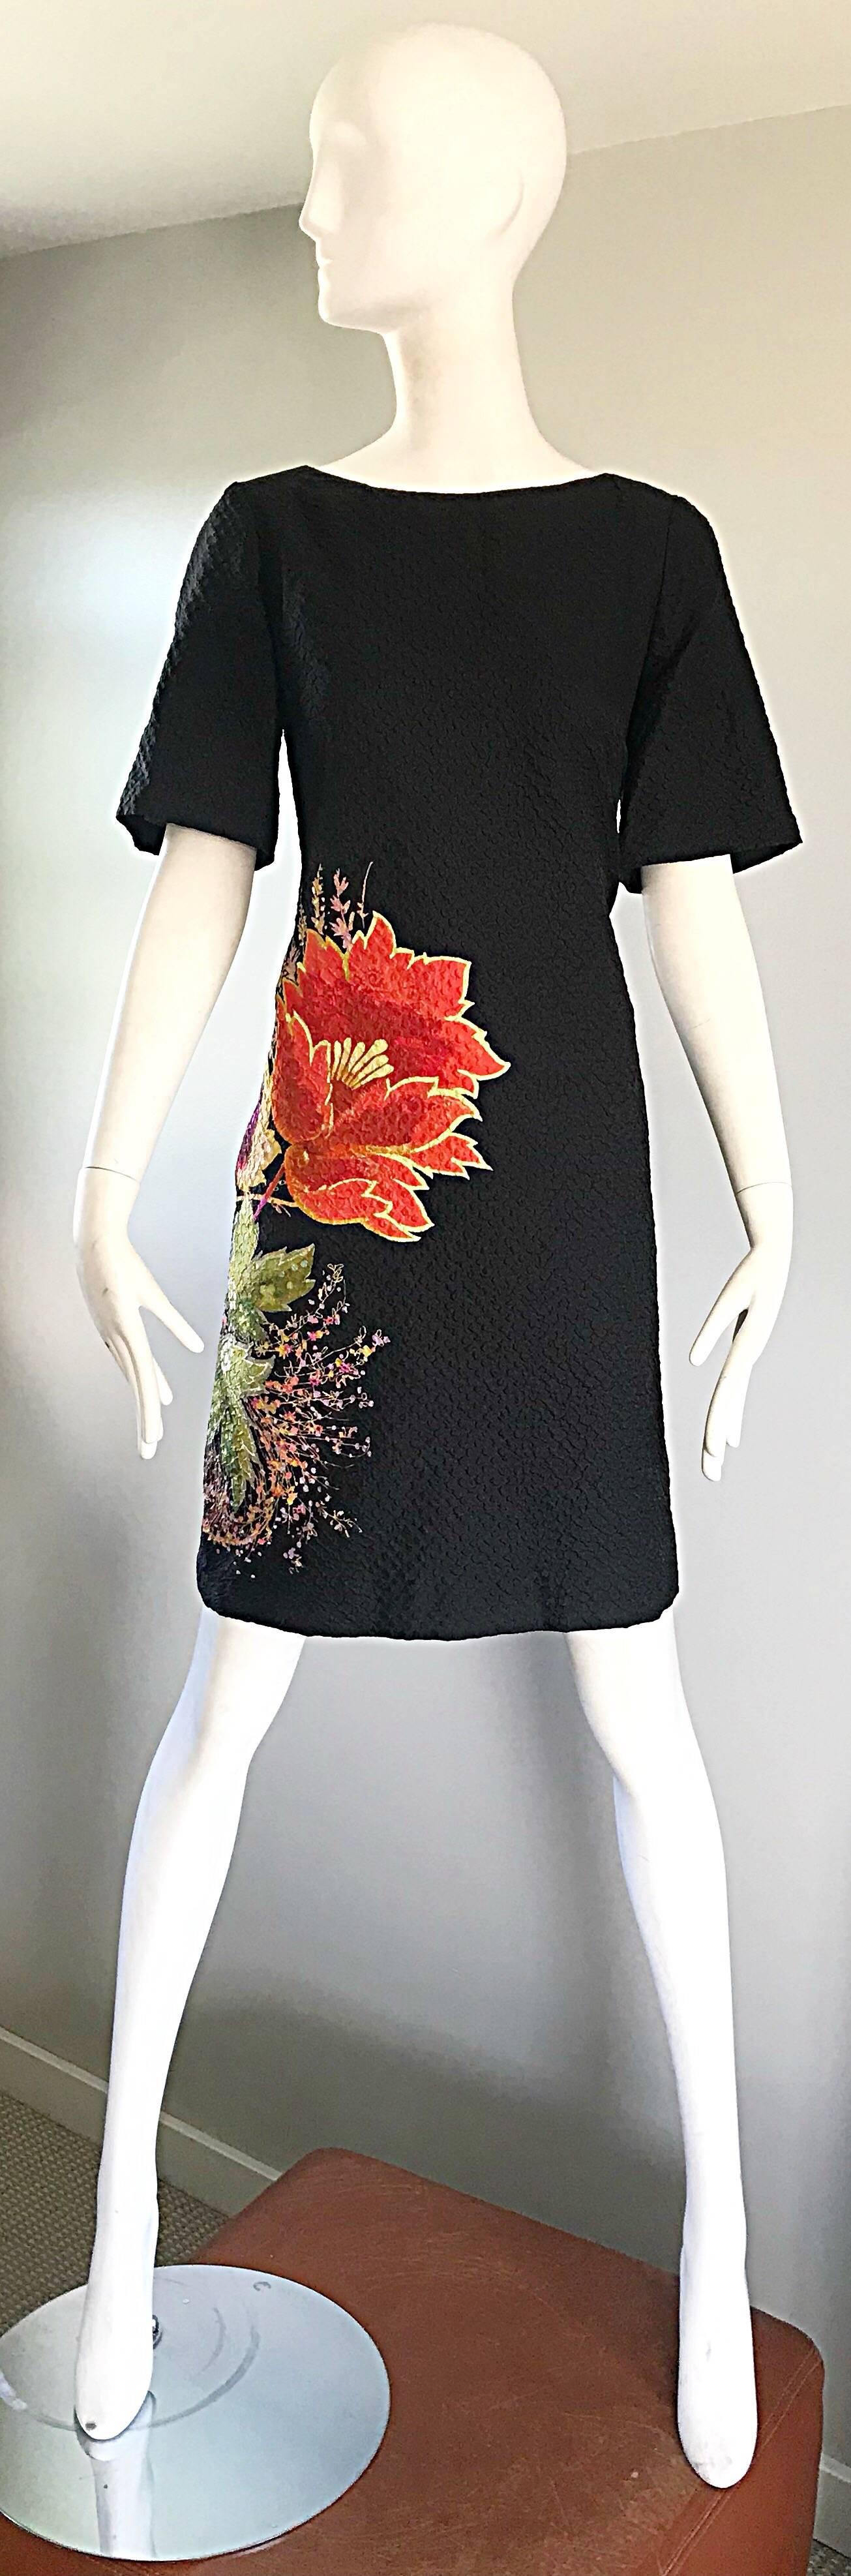 Chic 1990s ETRO short bell sleeve textured silk shift sac dress with POCKETS! Features a jet black background, with a colorful flower print in red, pink, yellow, purple and green on the side front and back. Hidden zipper up the back with